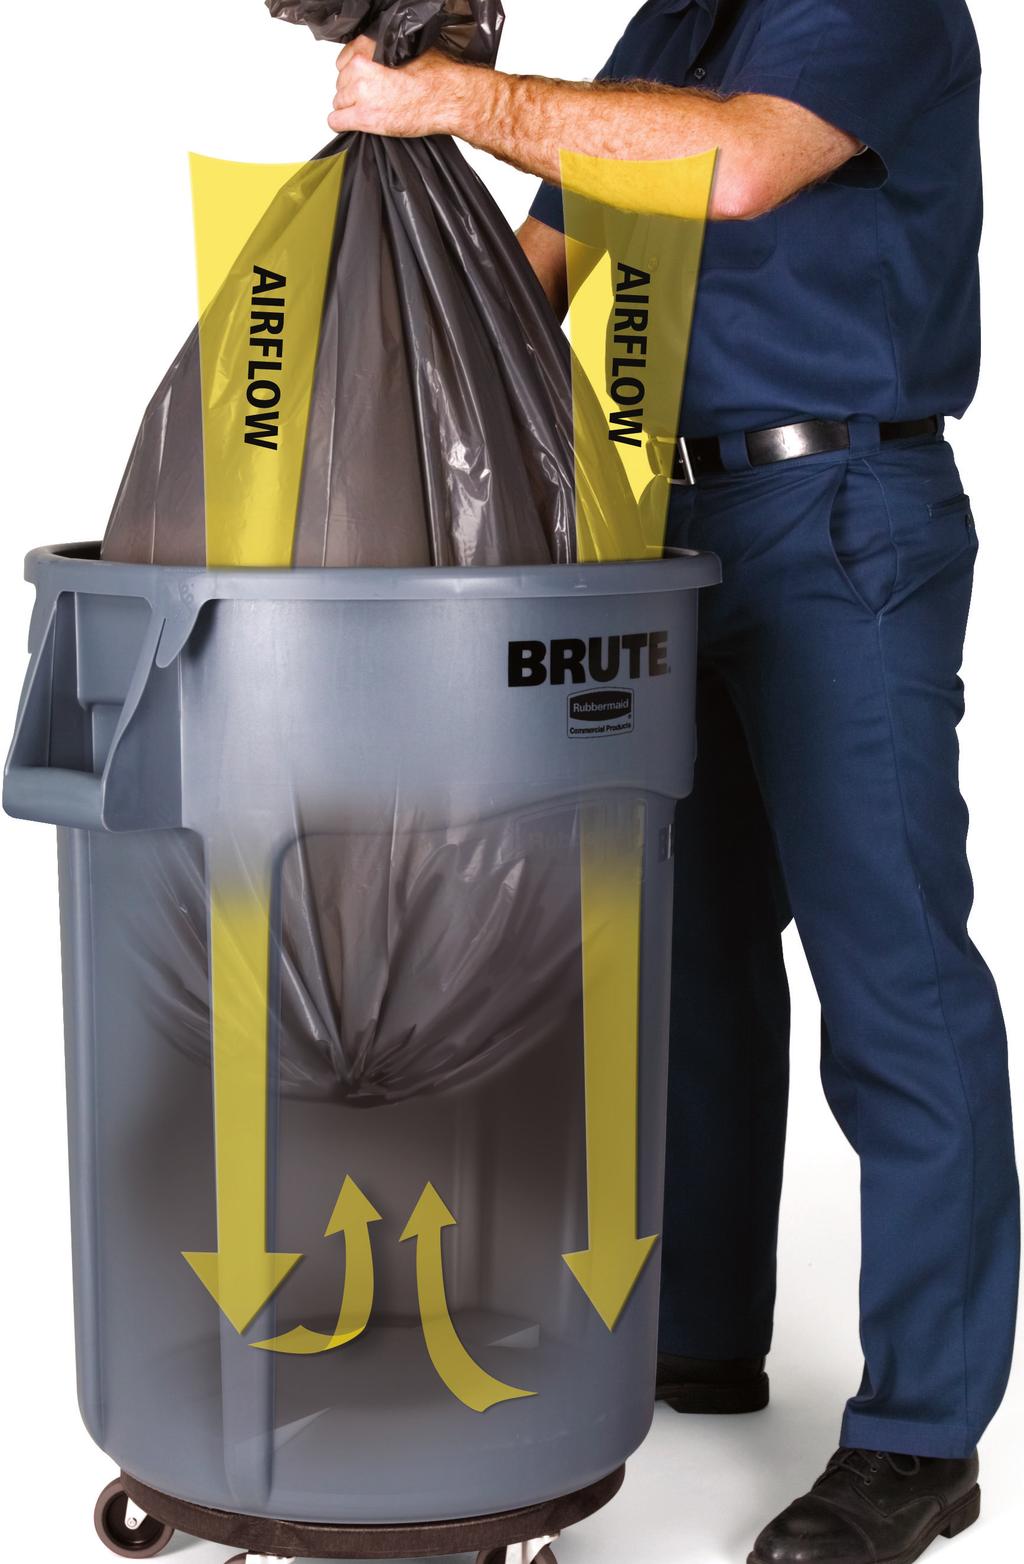 50% EASIER TO LIFT LINERS THE BRUTE IS DESIGNED WITH FOUR BUILT-IN VENTING CHANNELS that create airflow throughout the container.